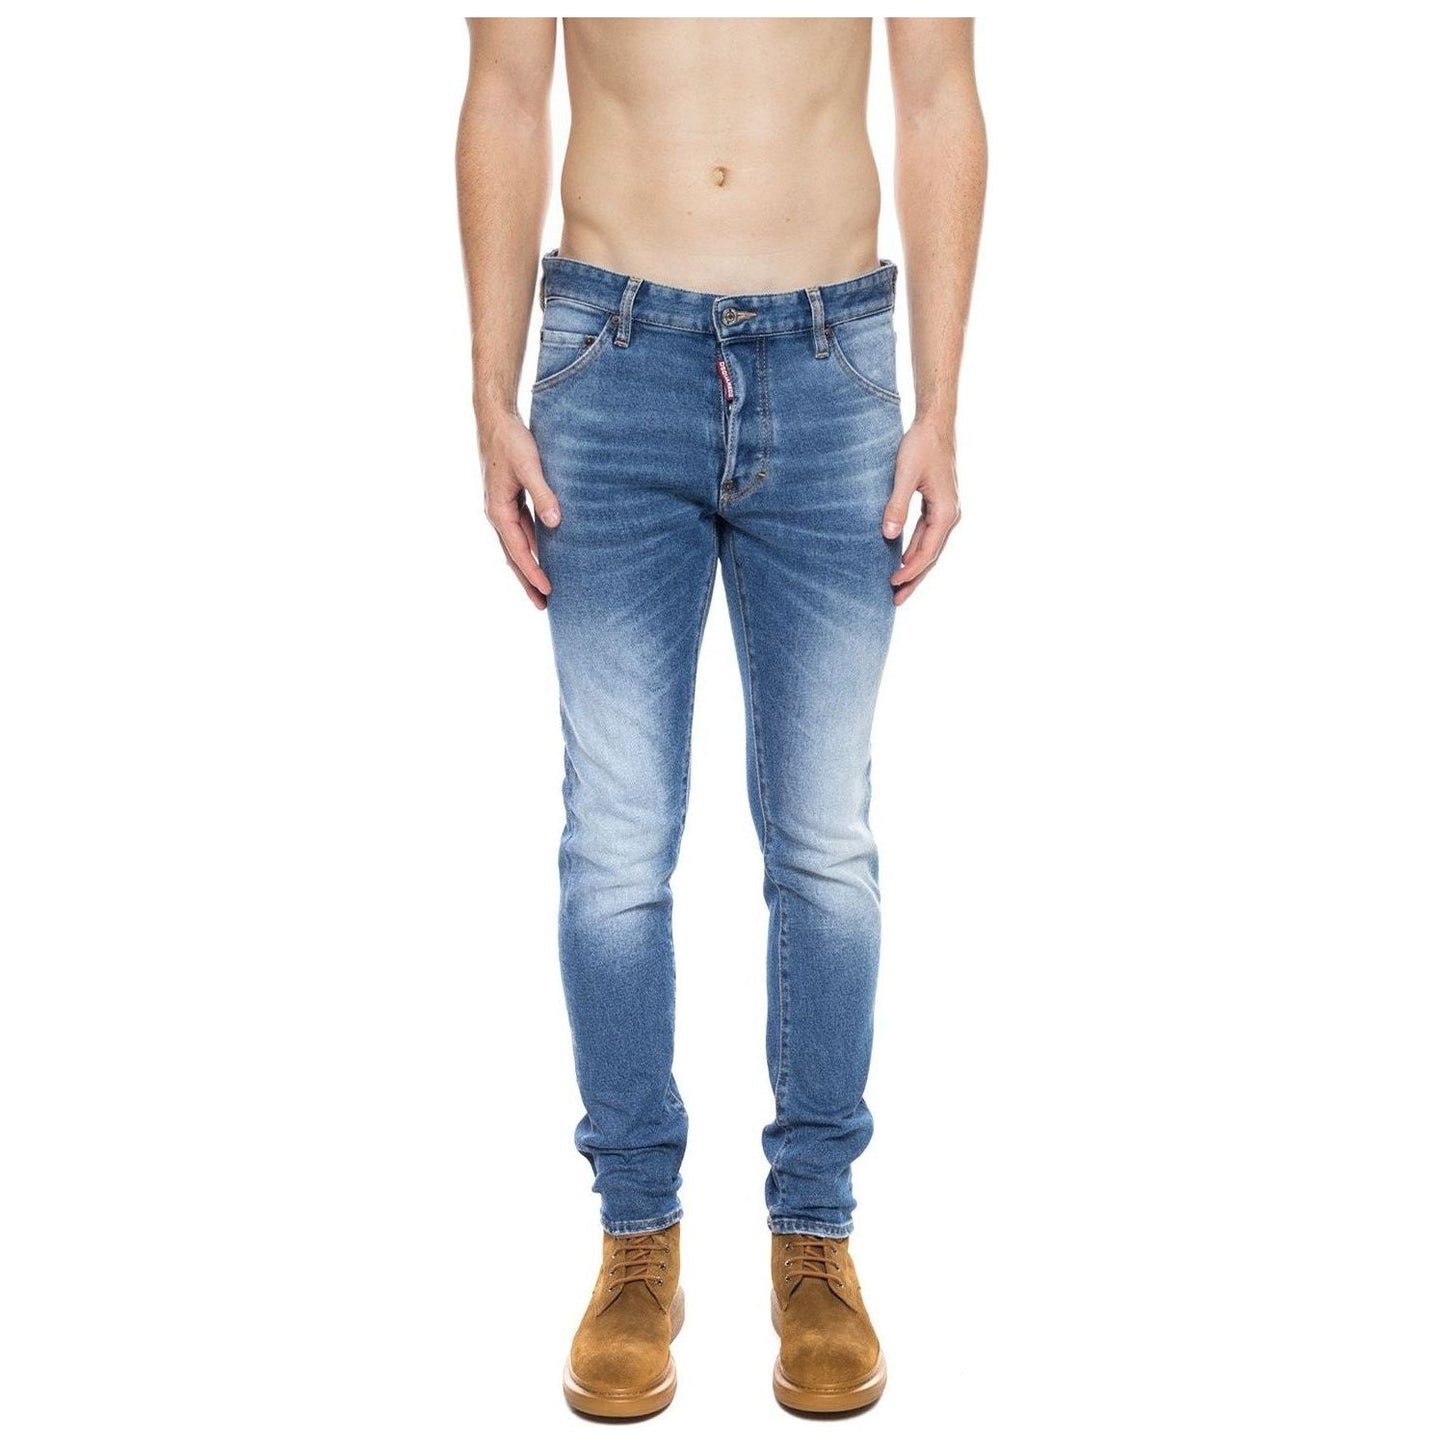 Dsquared² Chic Distressed Cool Guy Fit Jeans s-dsquared-jeans-pant-13